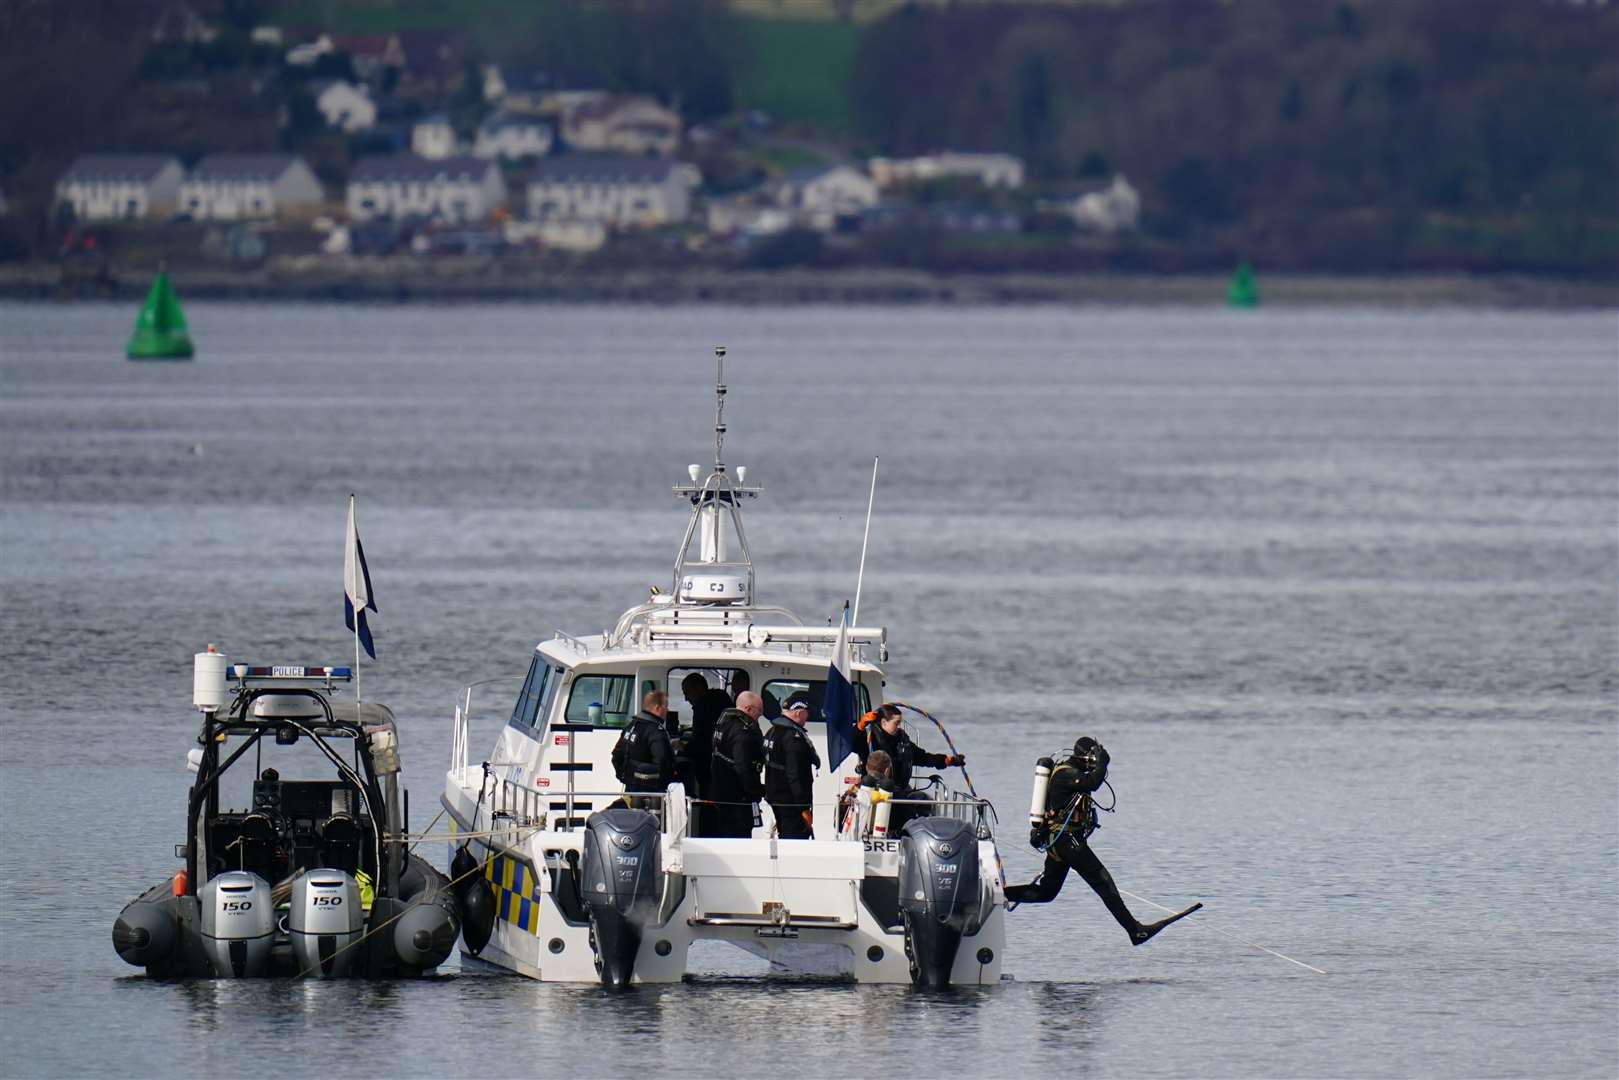 Police boats and divers taking part in the rescue operation in the Firth of Clyde (Jane Barlow/PA)